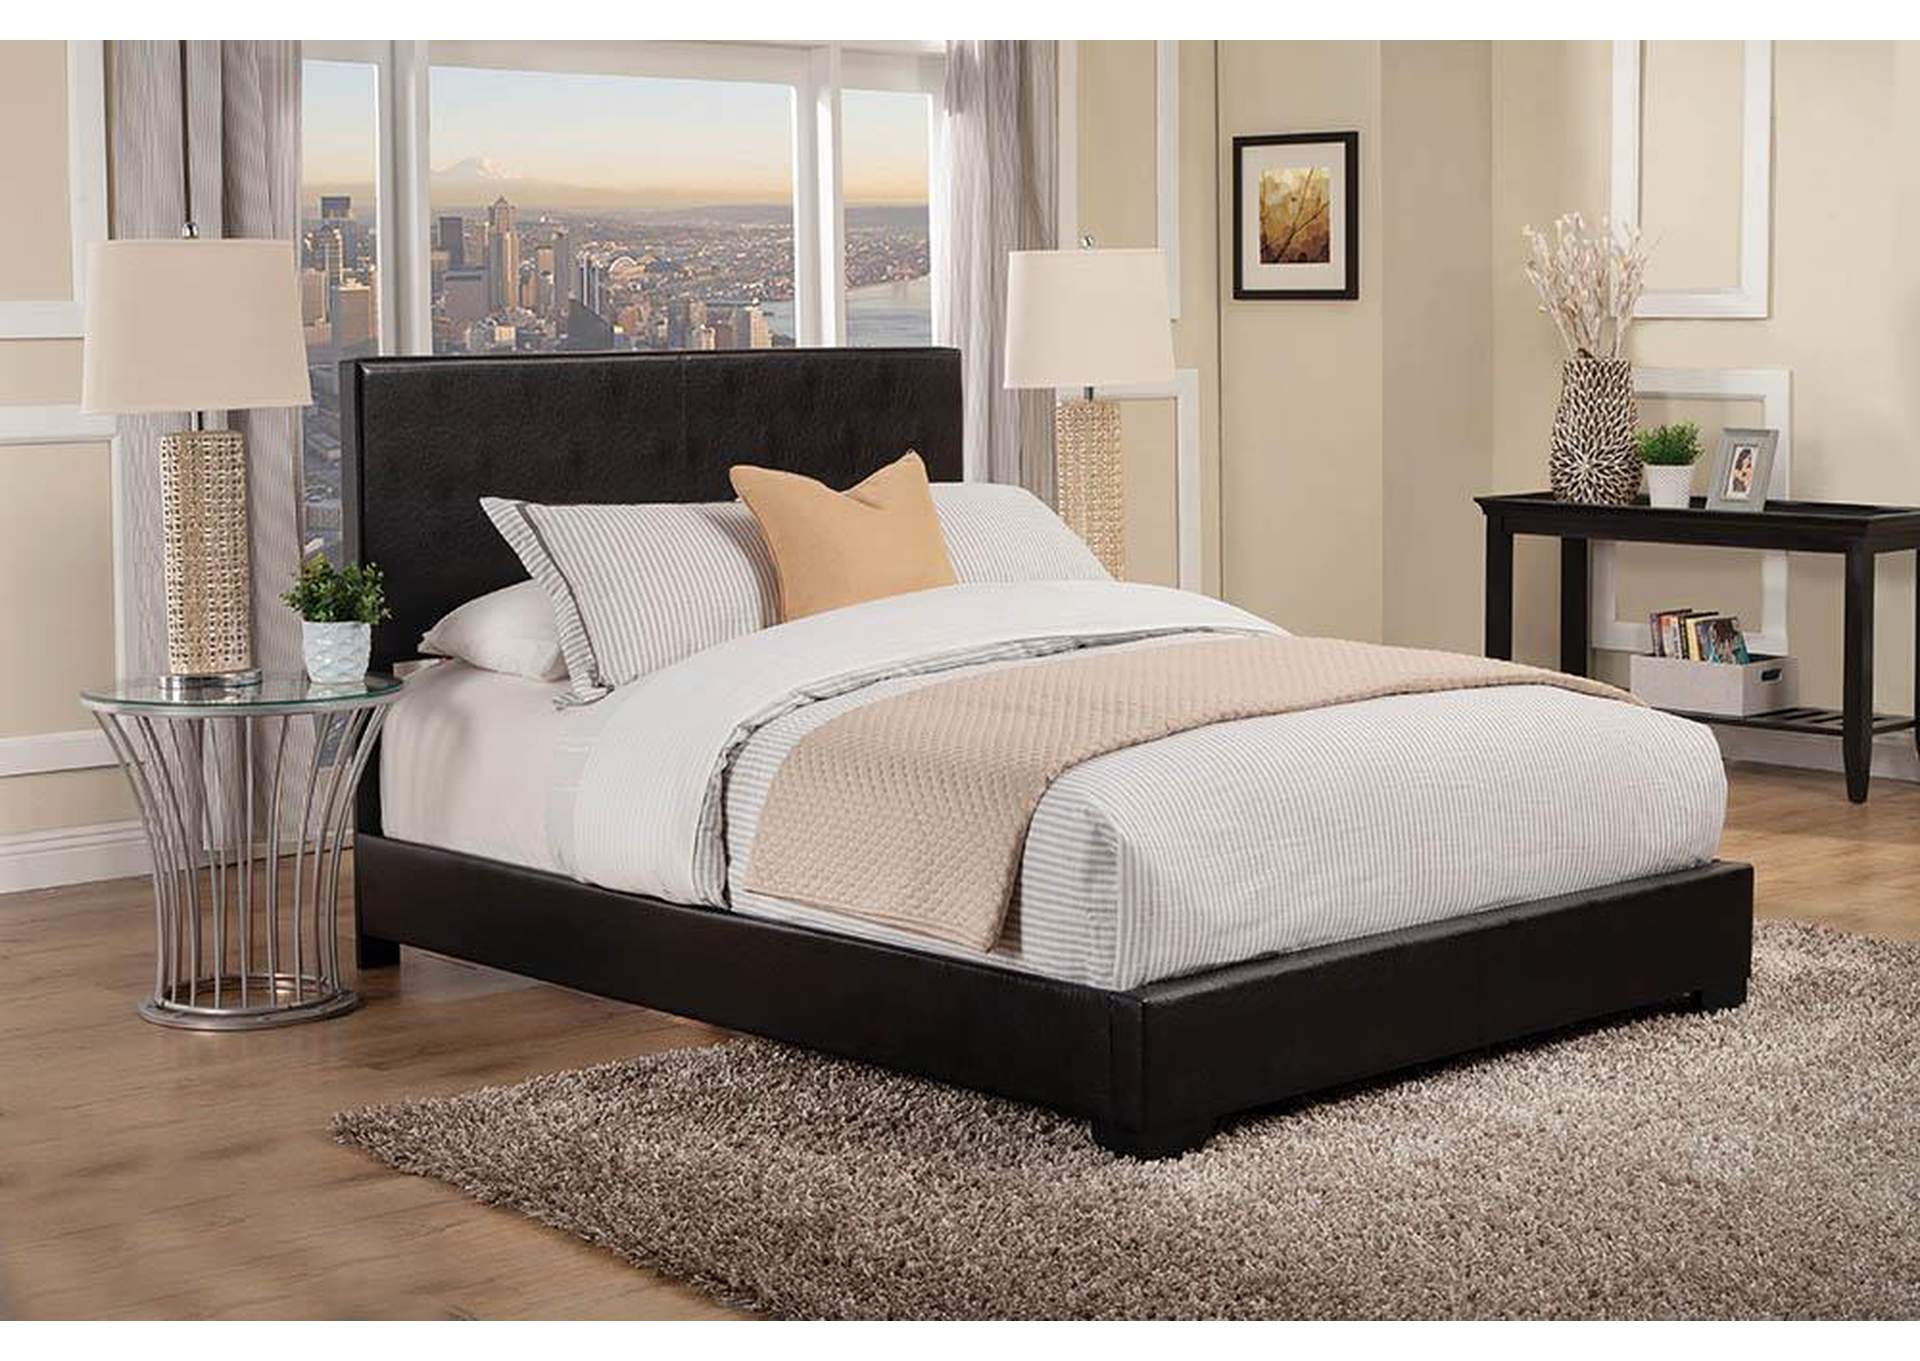 Conner Black Full Bed,ABF Coaster Furniture